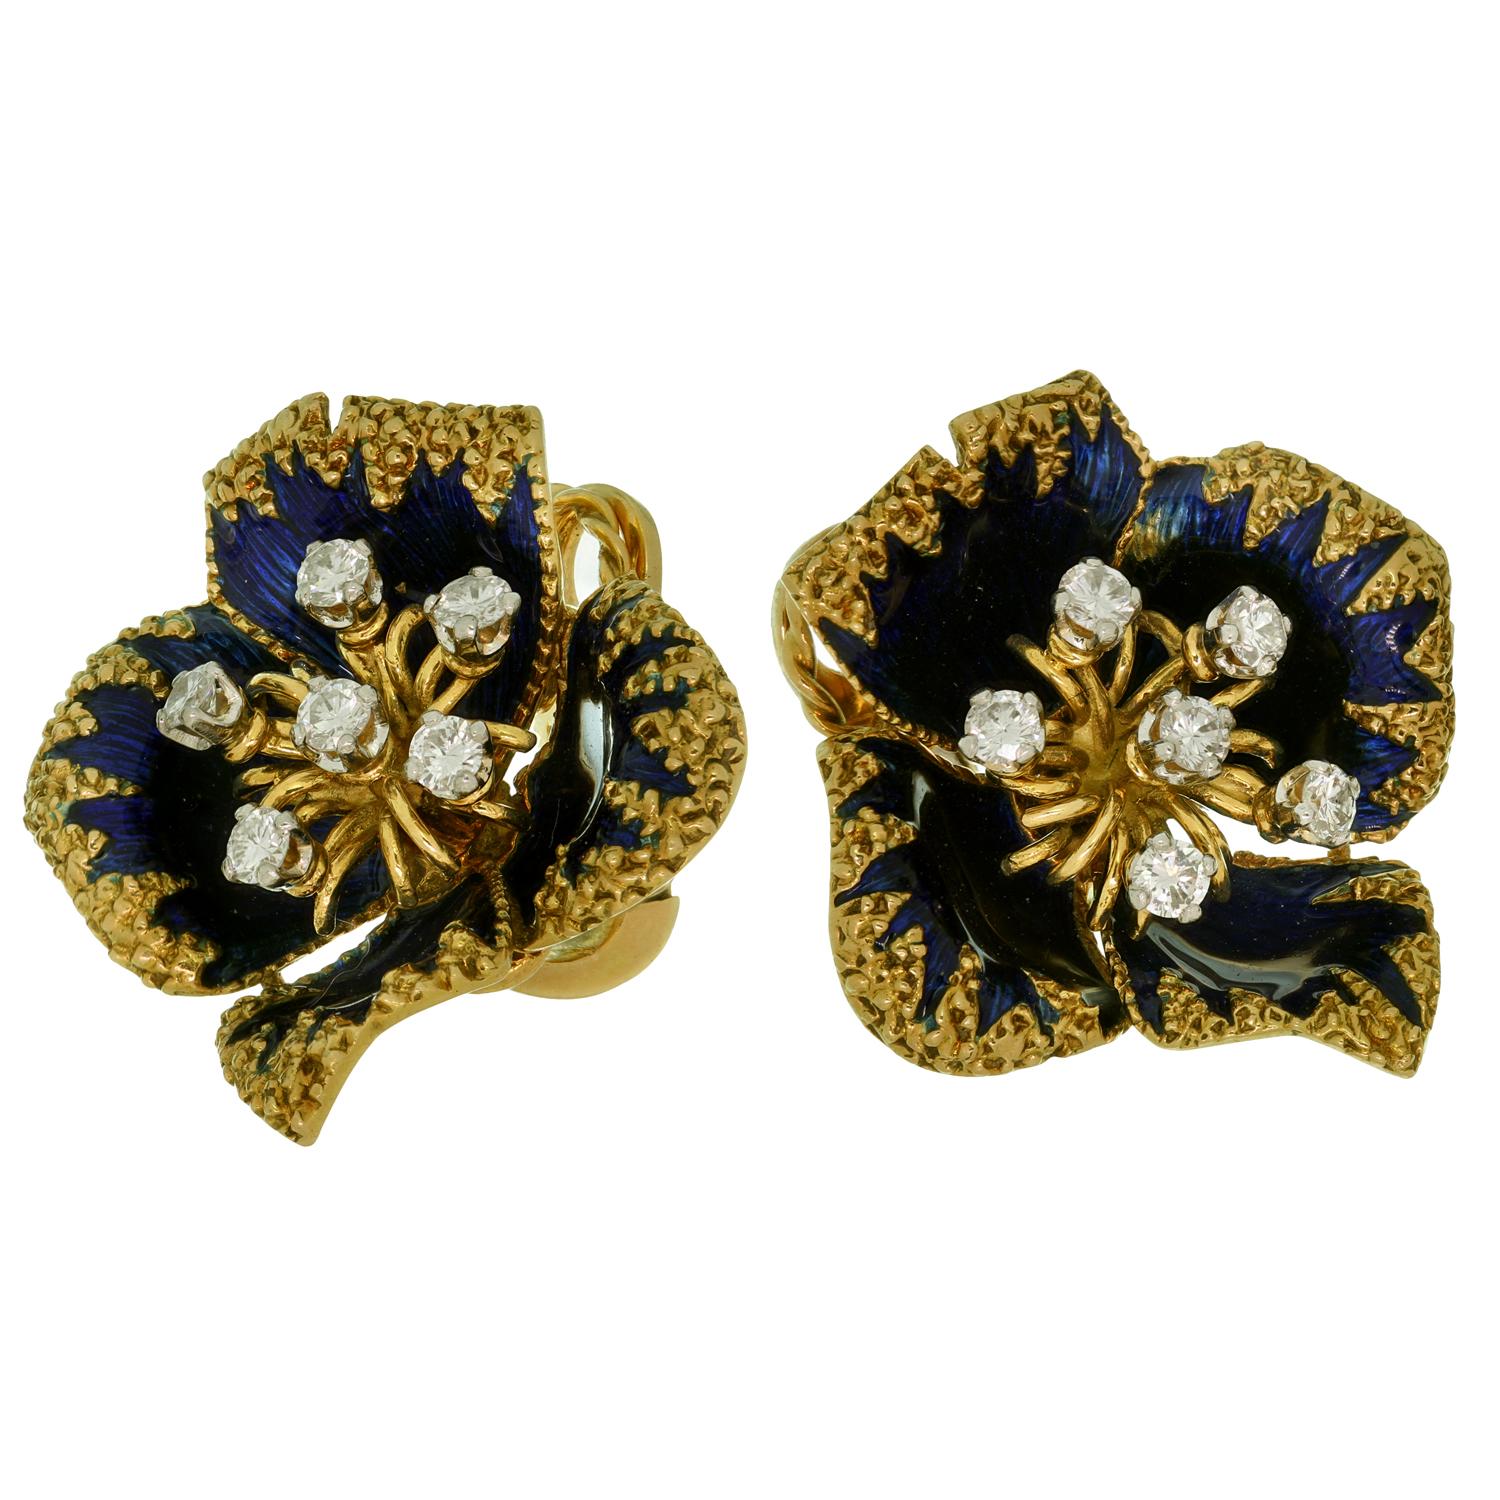 These gorgeous antique Cartier clip-on earrings are crafted in 18k yellow gold and blue enamel and set with round brilliant F-G VVS1-VVS2 diamonds weighing an estimated 0.90 - 1.0 carats. With maker's mark and French assay serial. Made in France